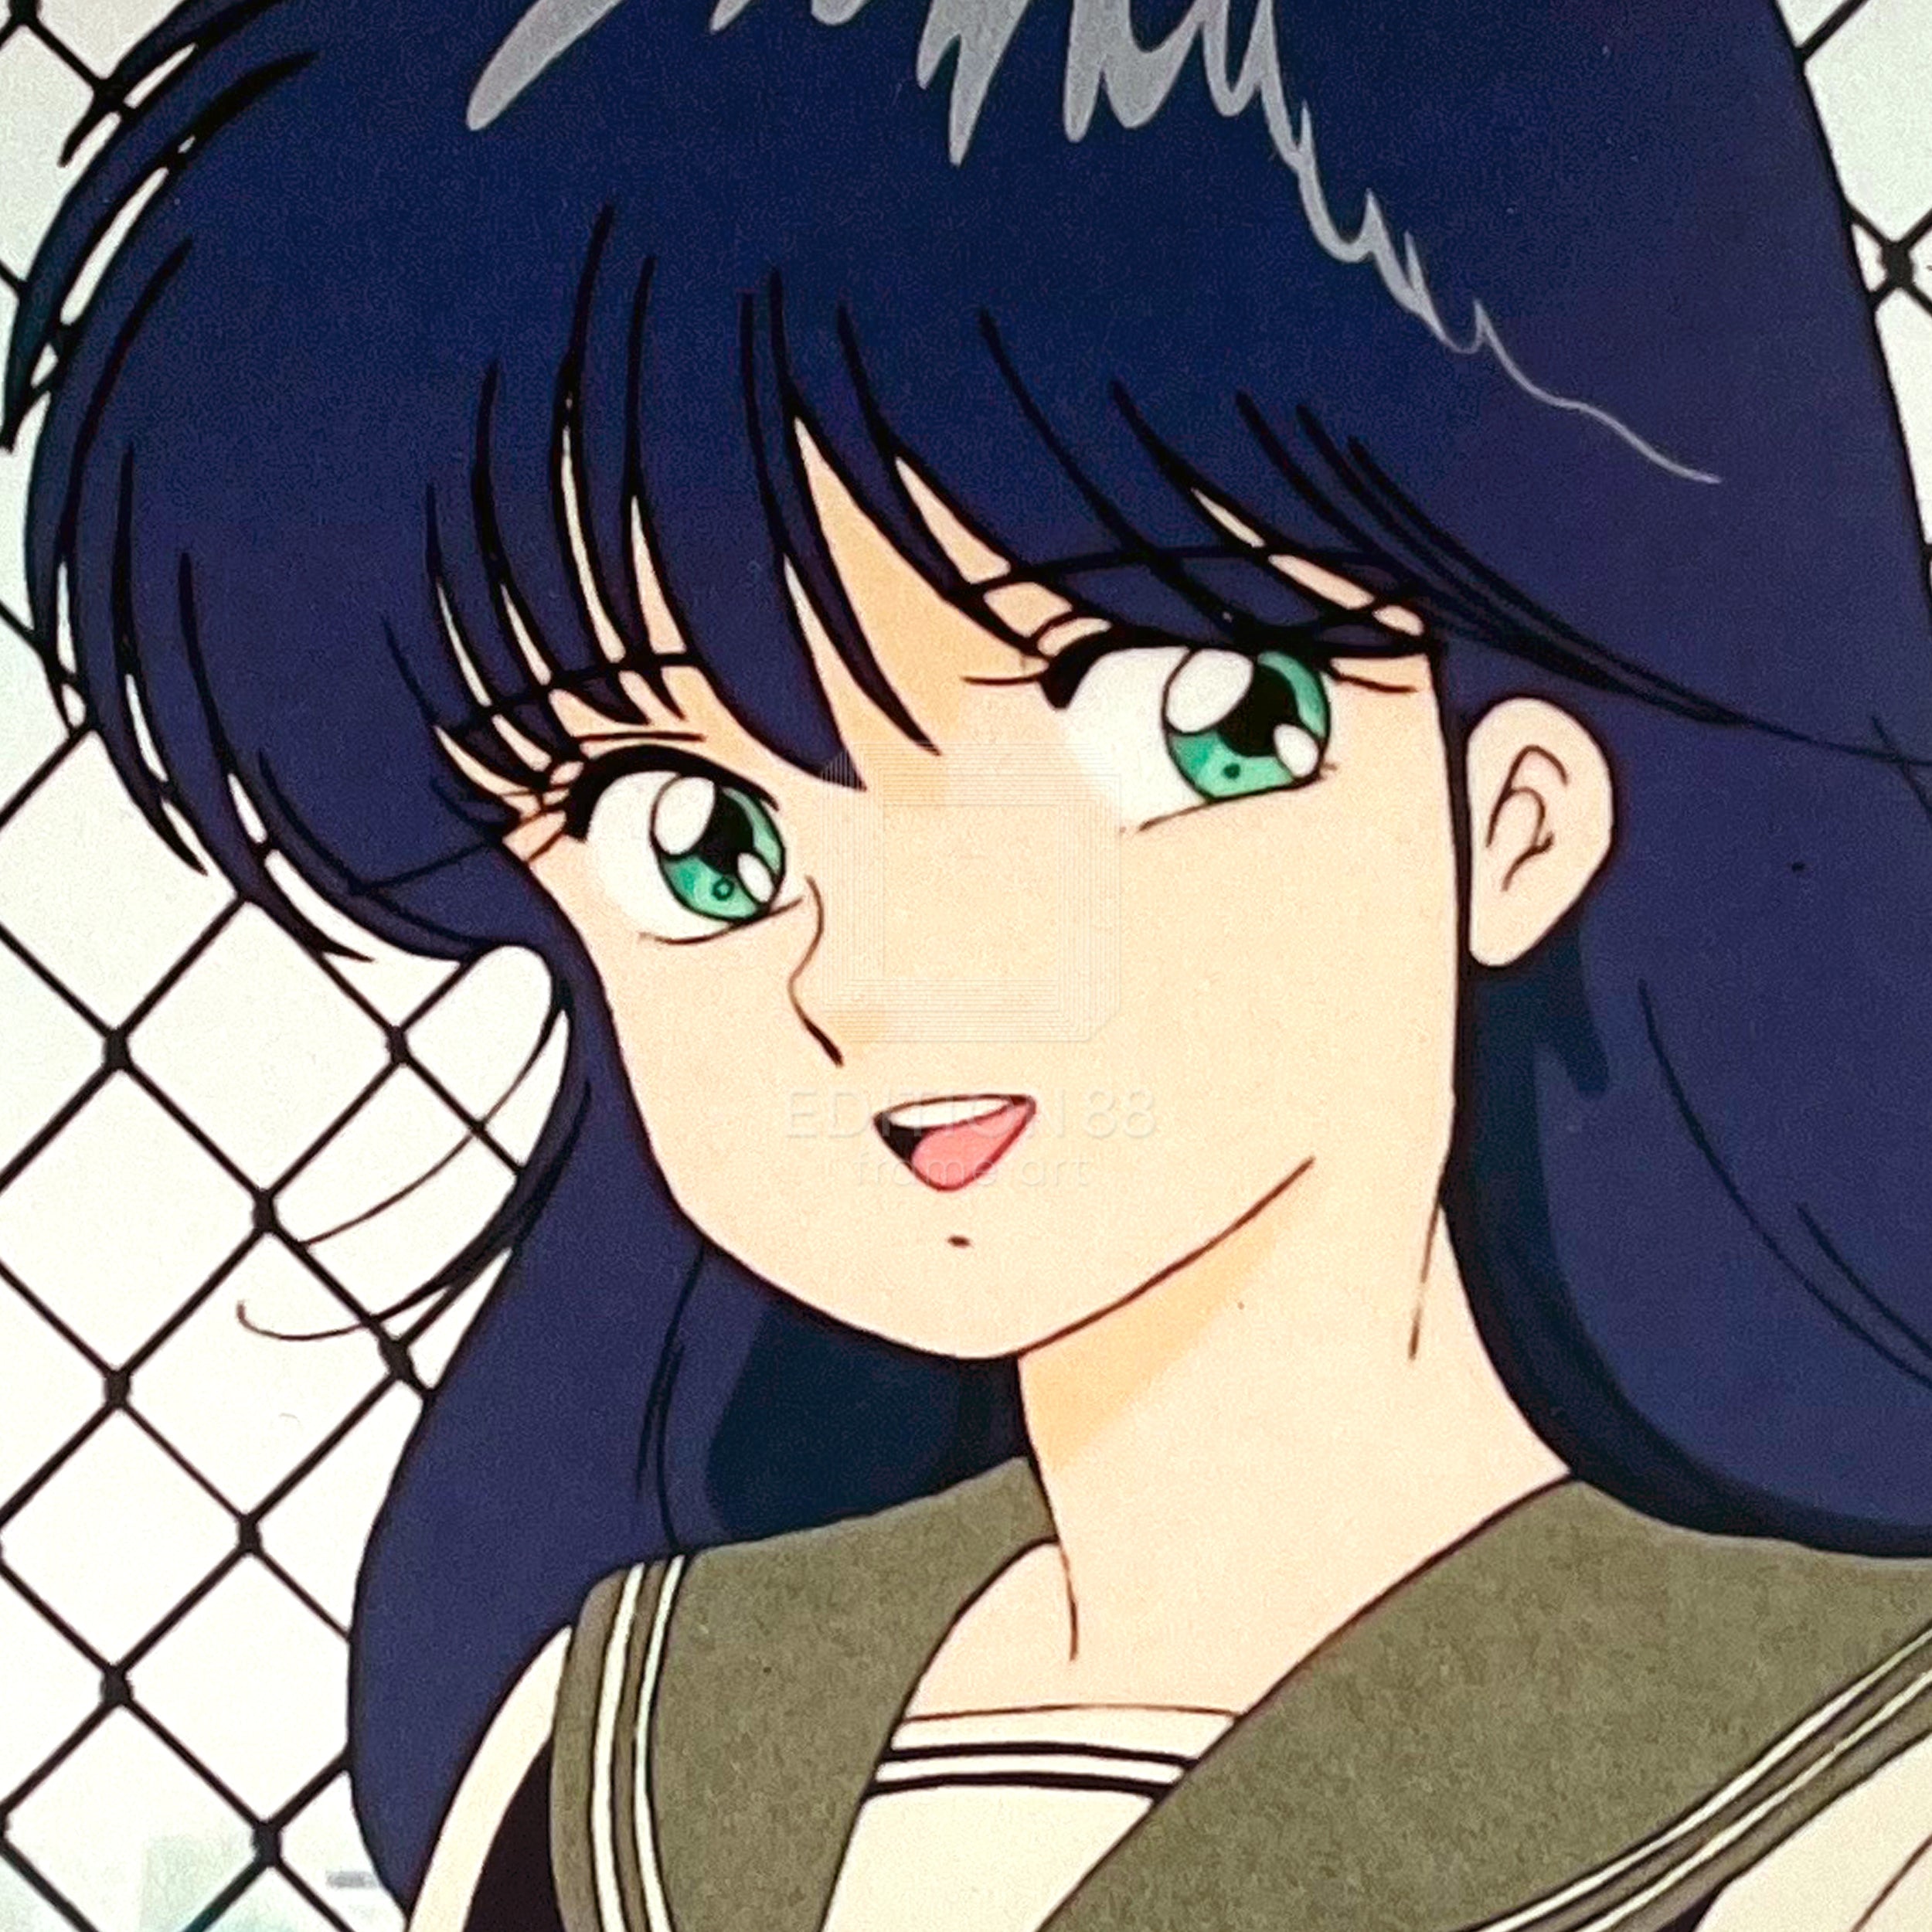 Kimagure Orange Road, 88Filmgraph #5, Episode8 - You’re Smiling! A 'Shutter-Chance' at the Beach